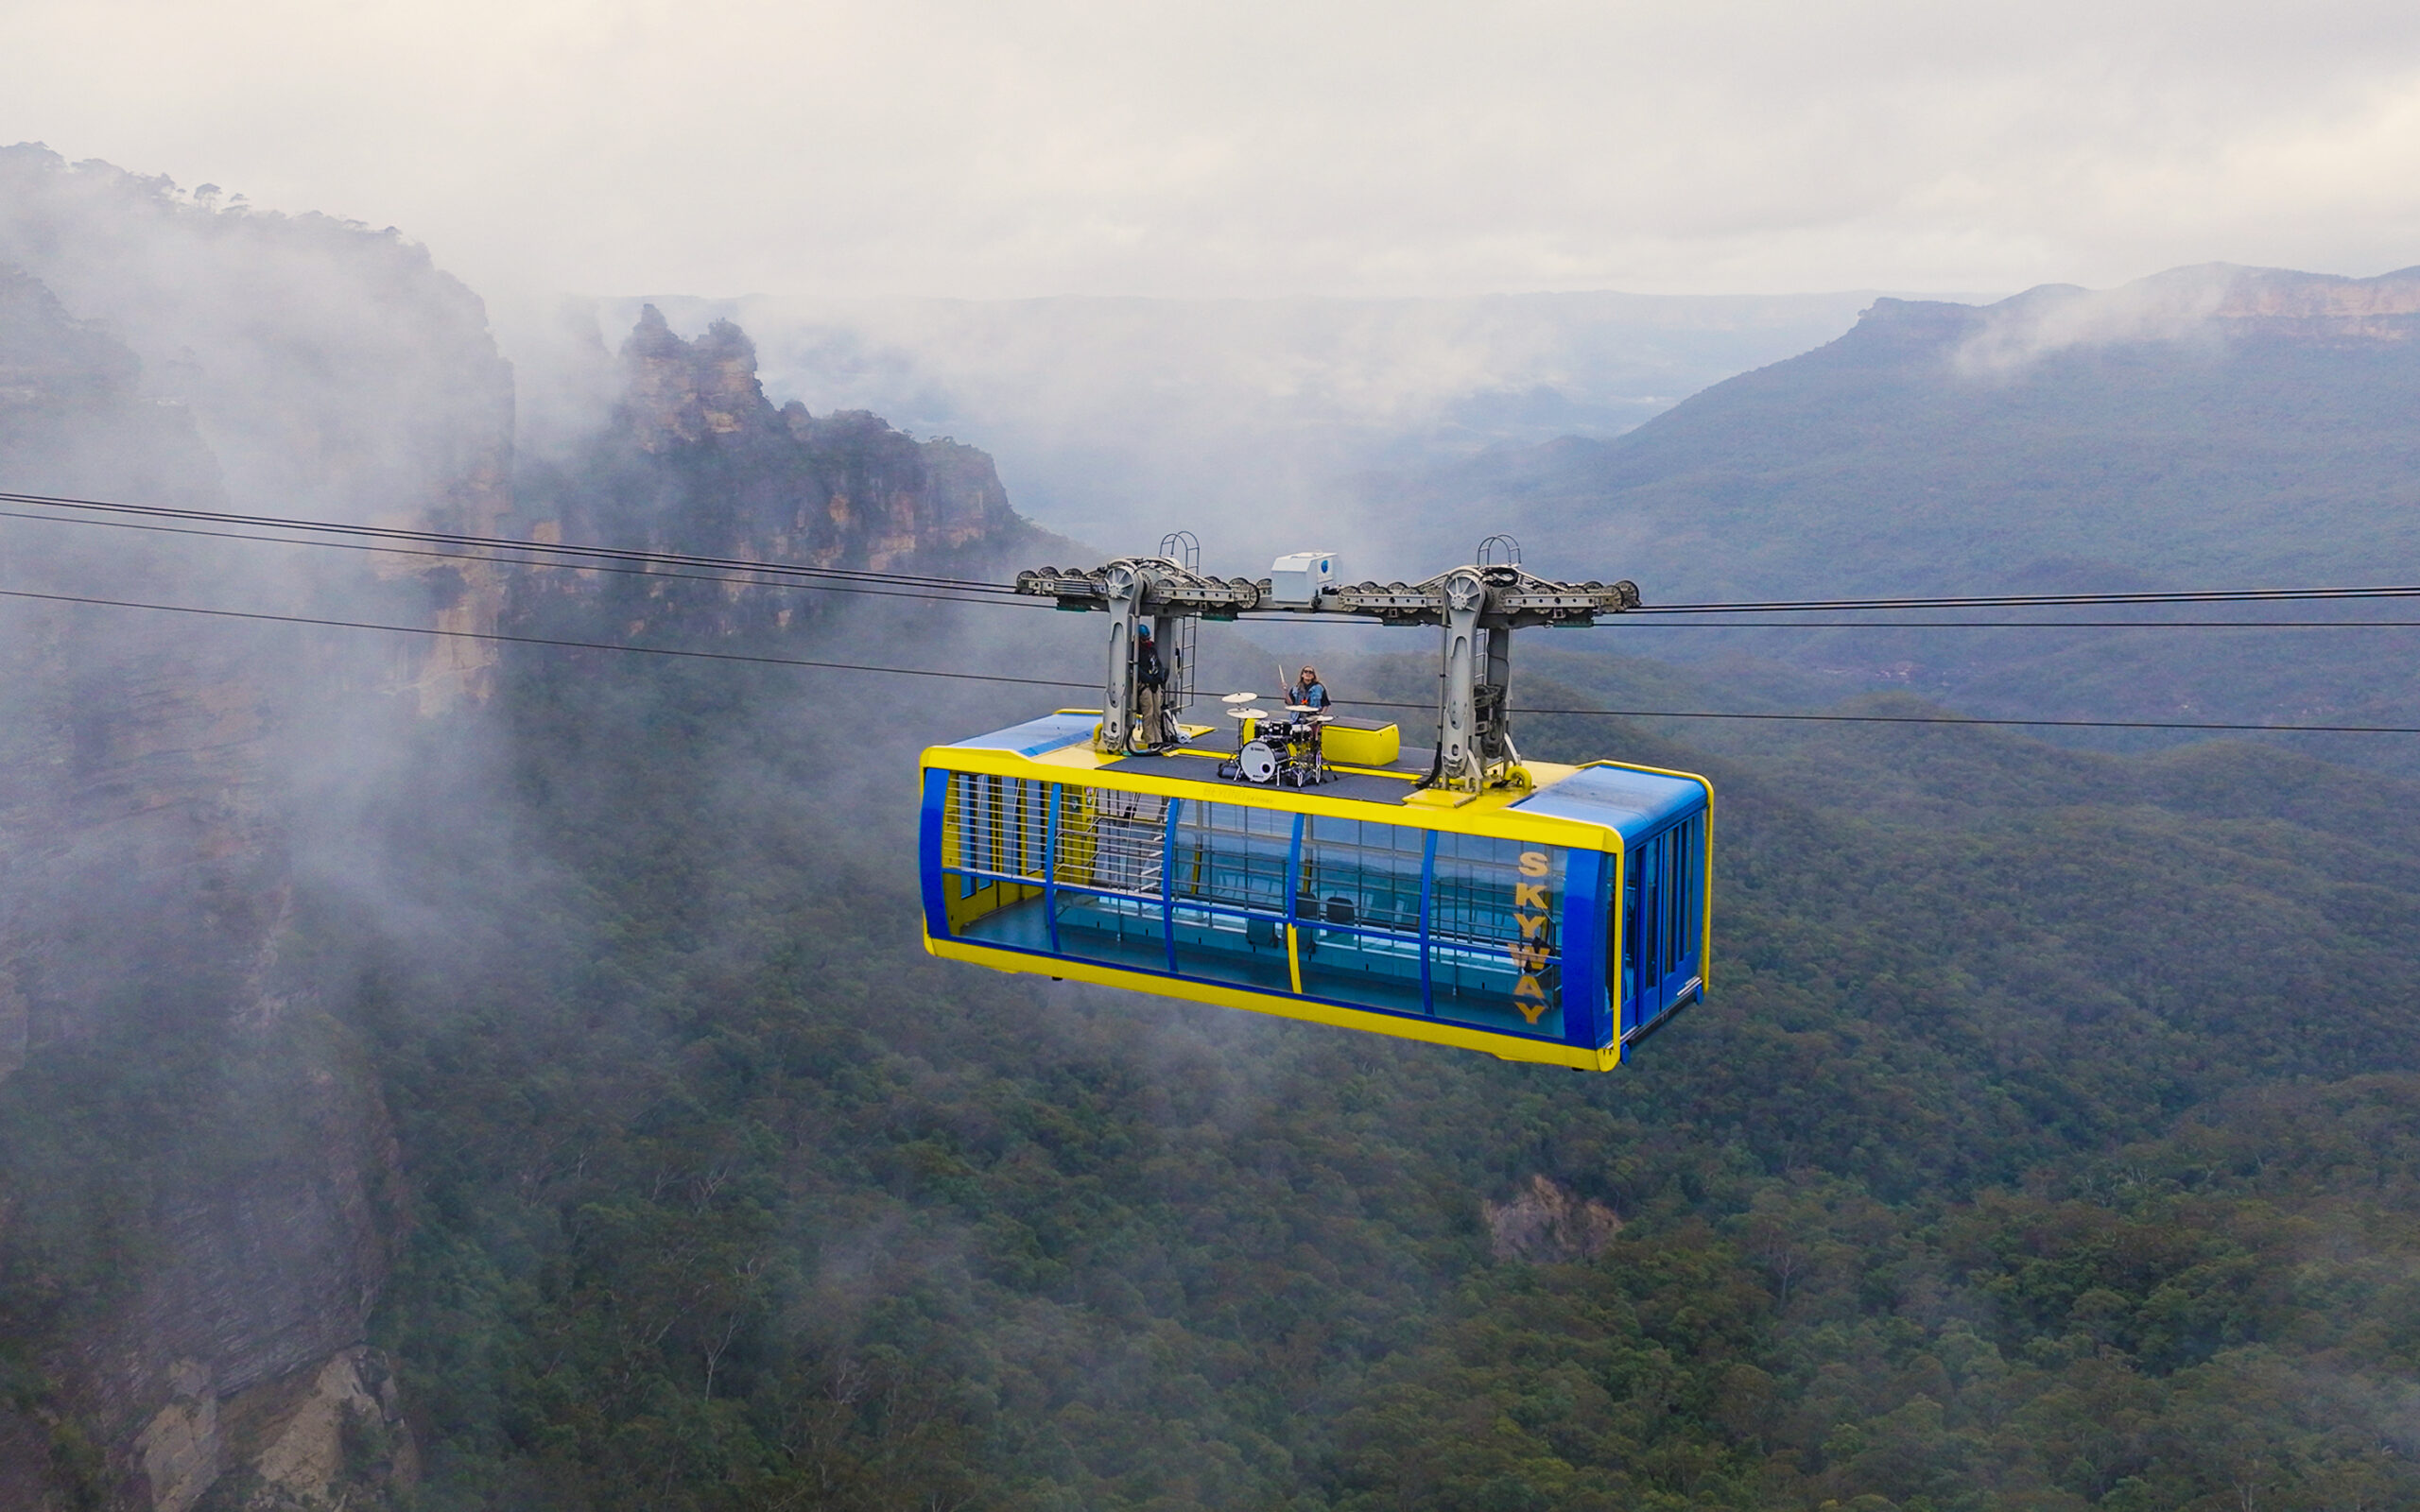 G Flip atop a cable car in the Blue Mountains for her new video, "Drummer." (Photo Credit: Destination NSW)